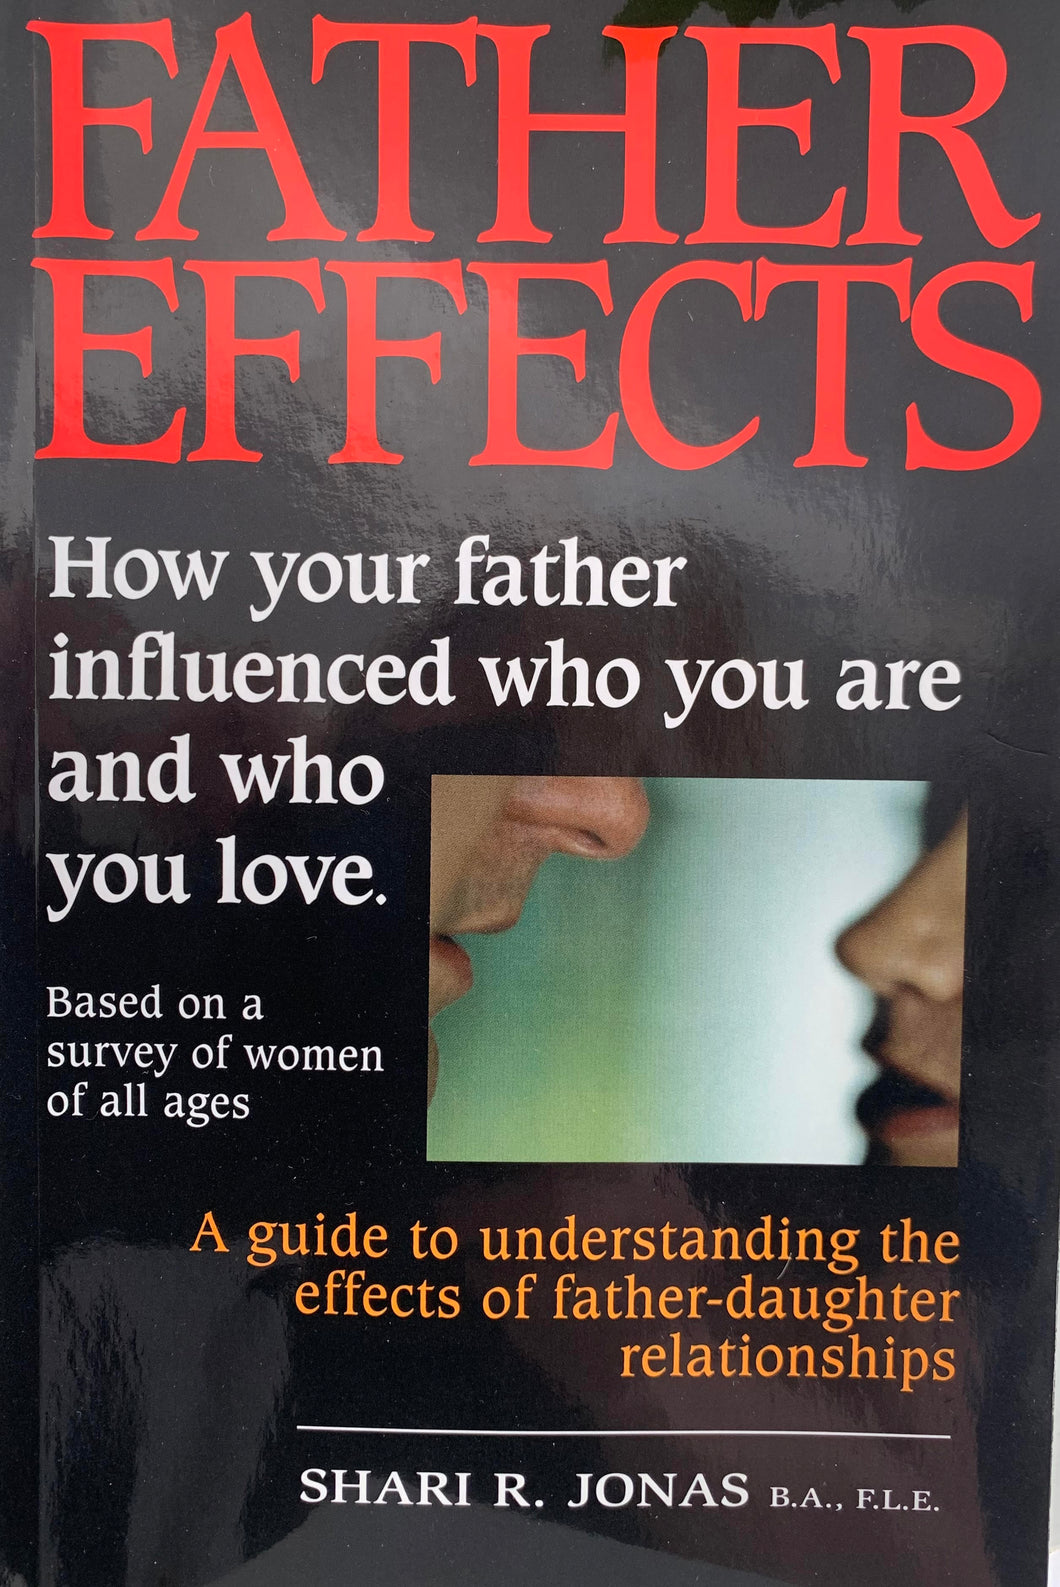 FatherEffects eBook- How Your Father Influenced Who You Are and Who You Love